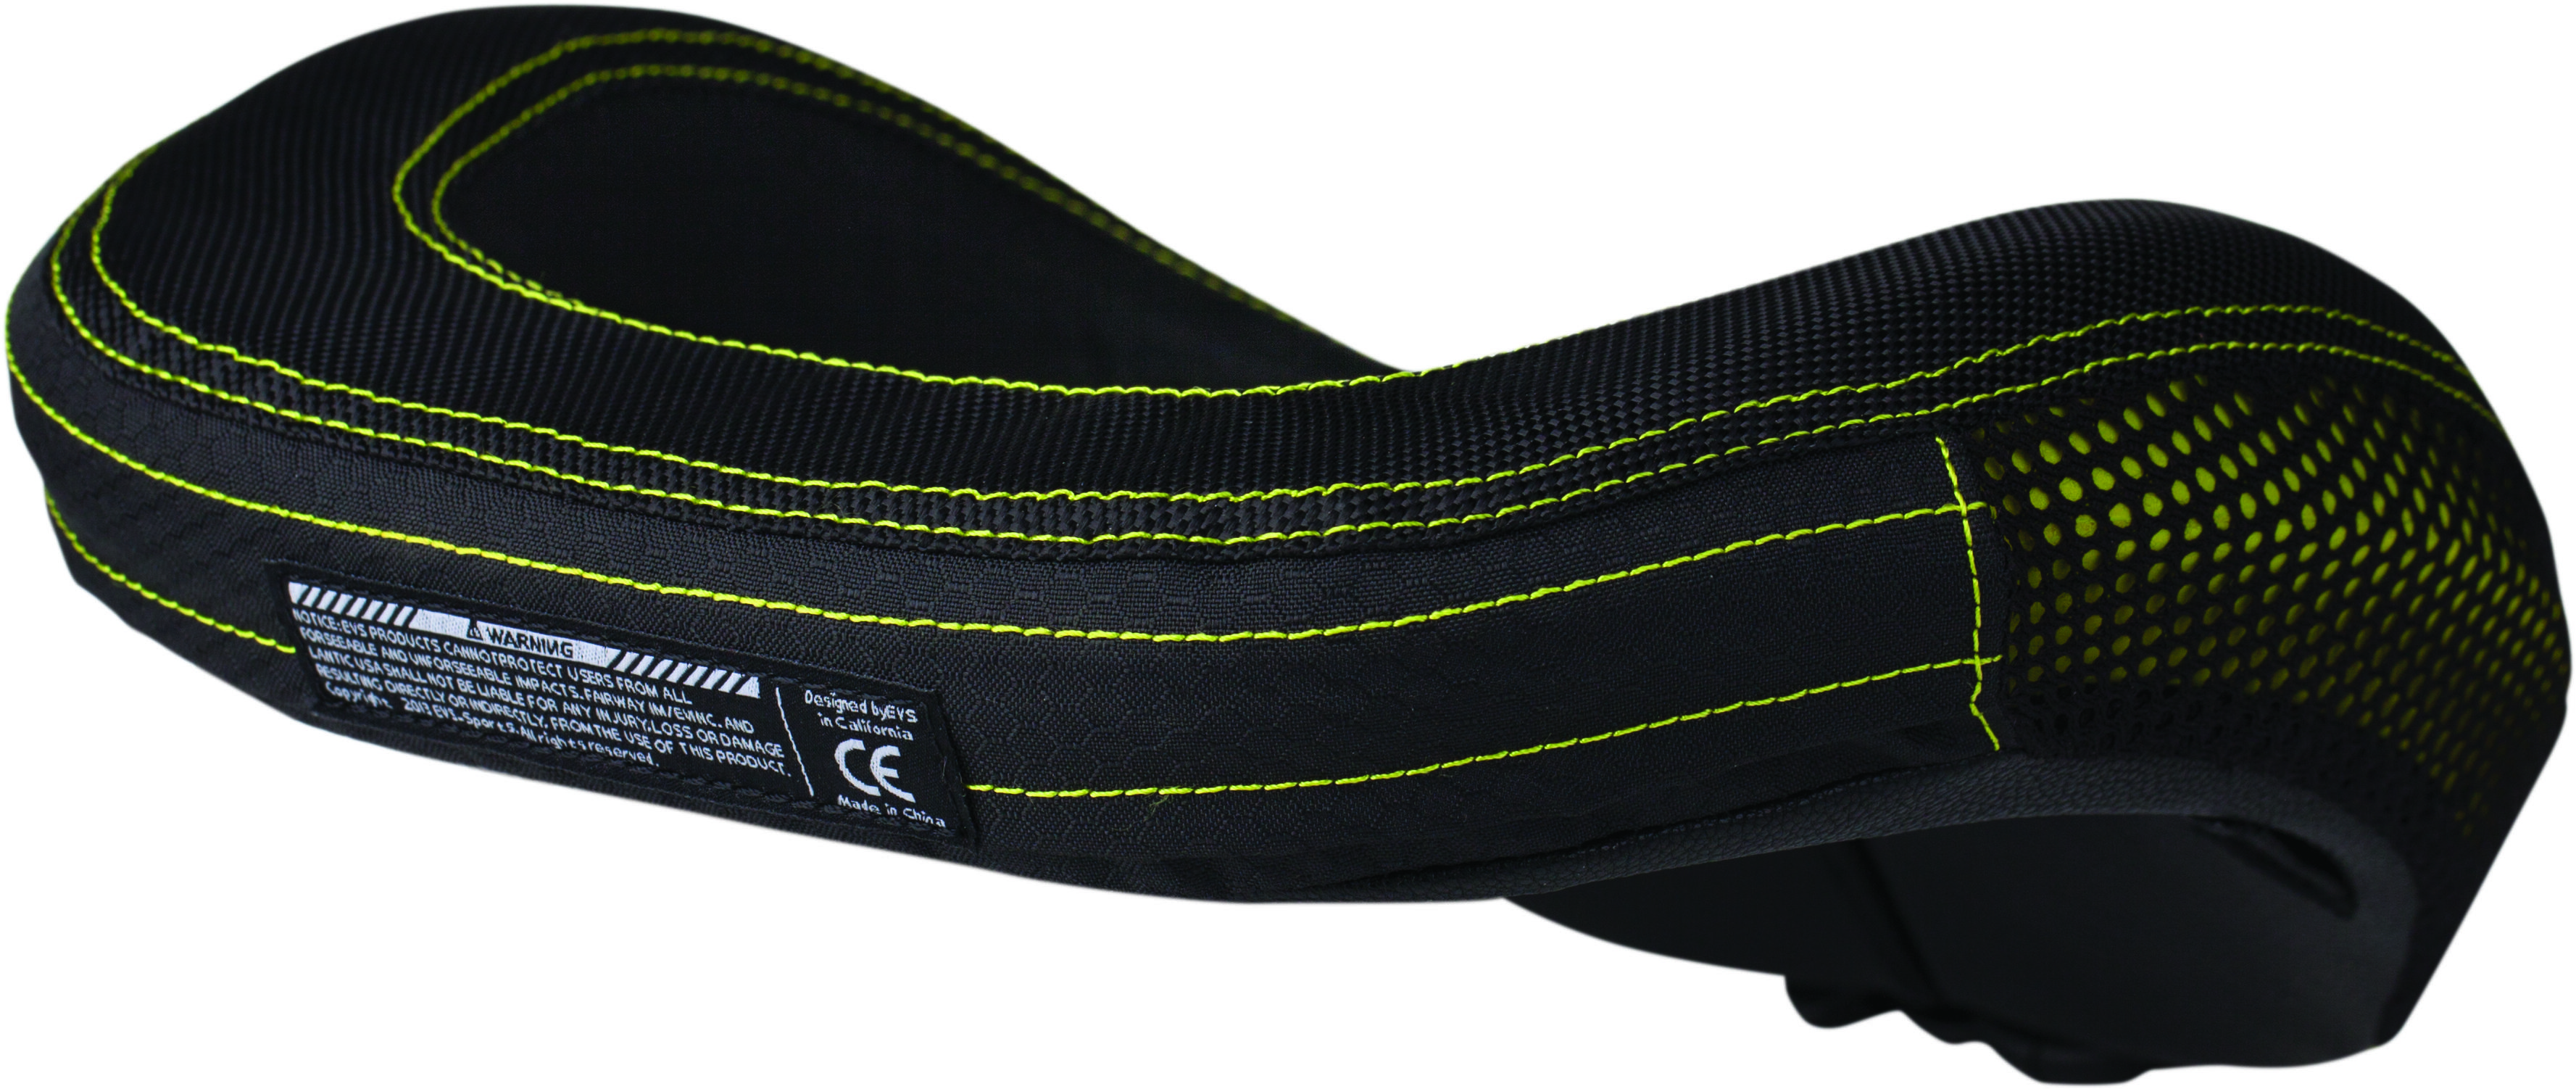 R2 Race Collar Black Youth - Click Image to Close